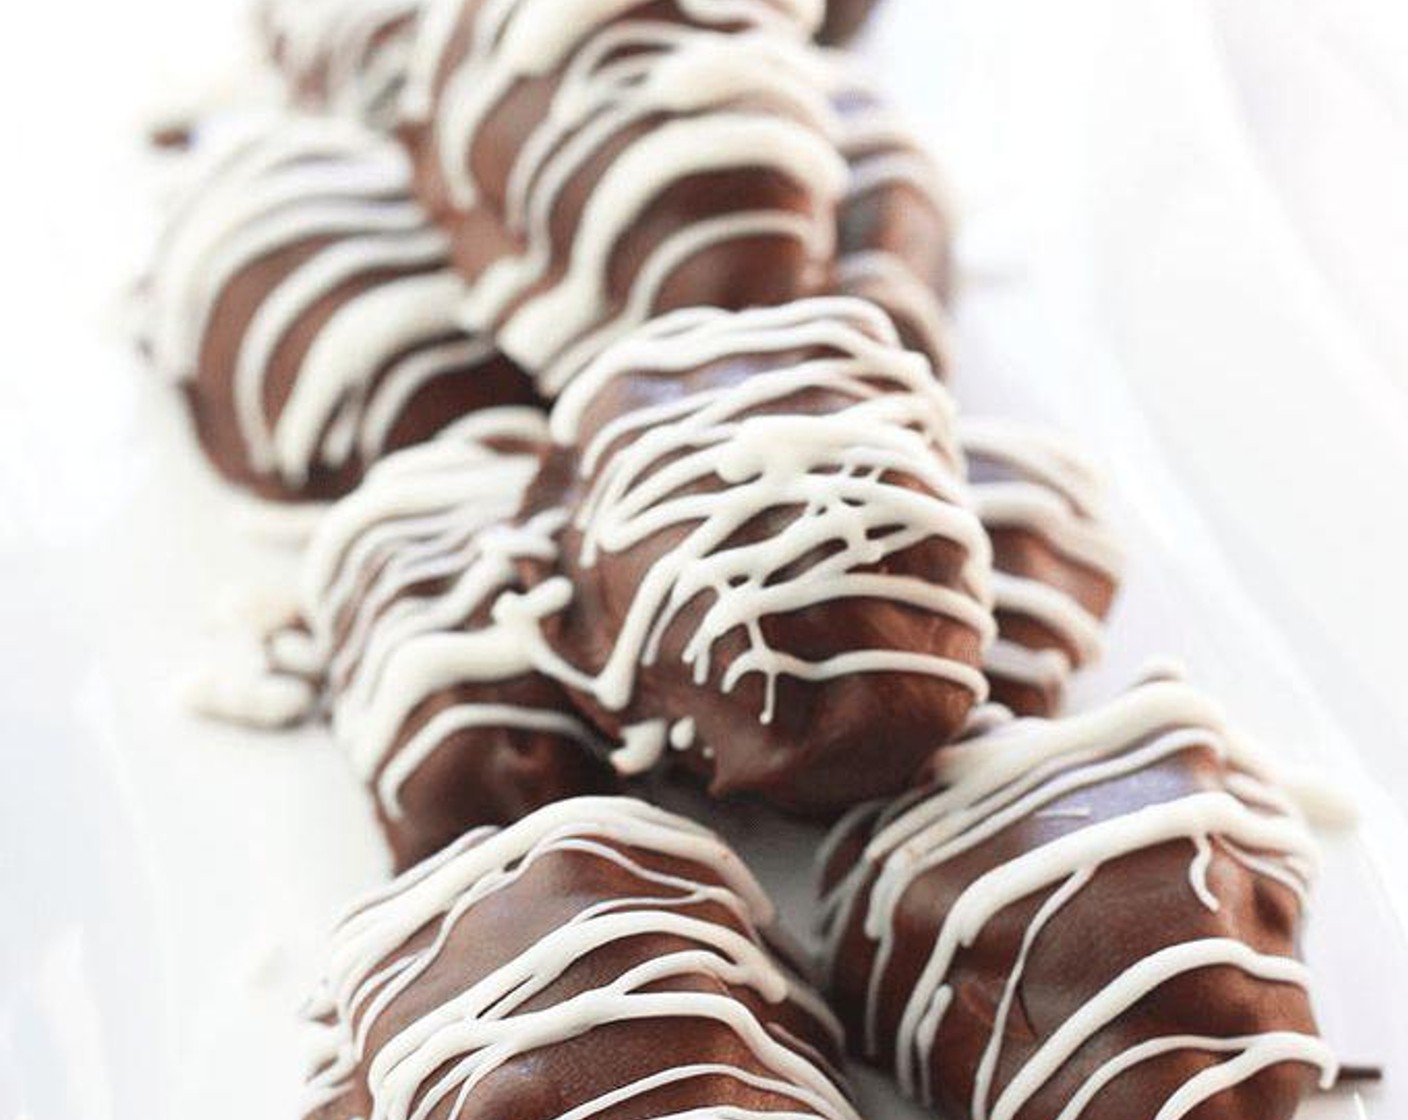 Chocolate Covered Nut Butter Stuffed Dates